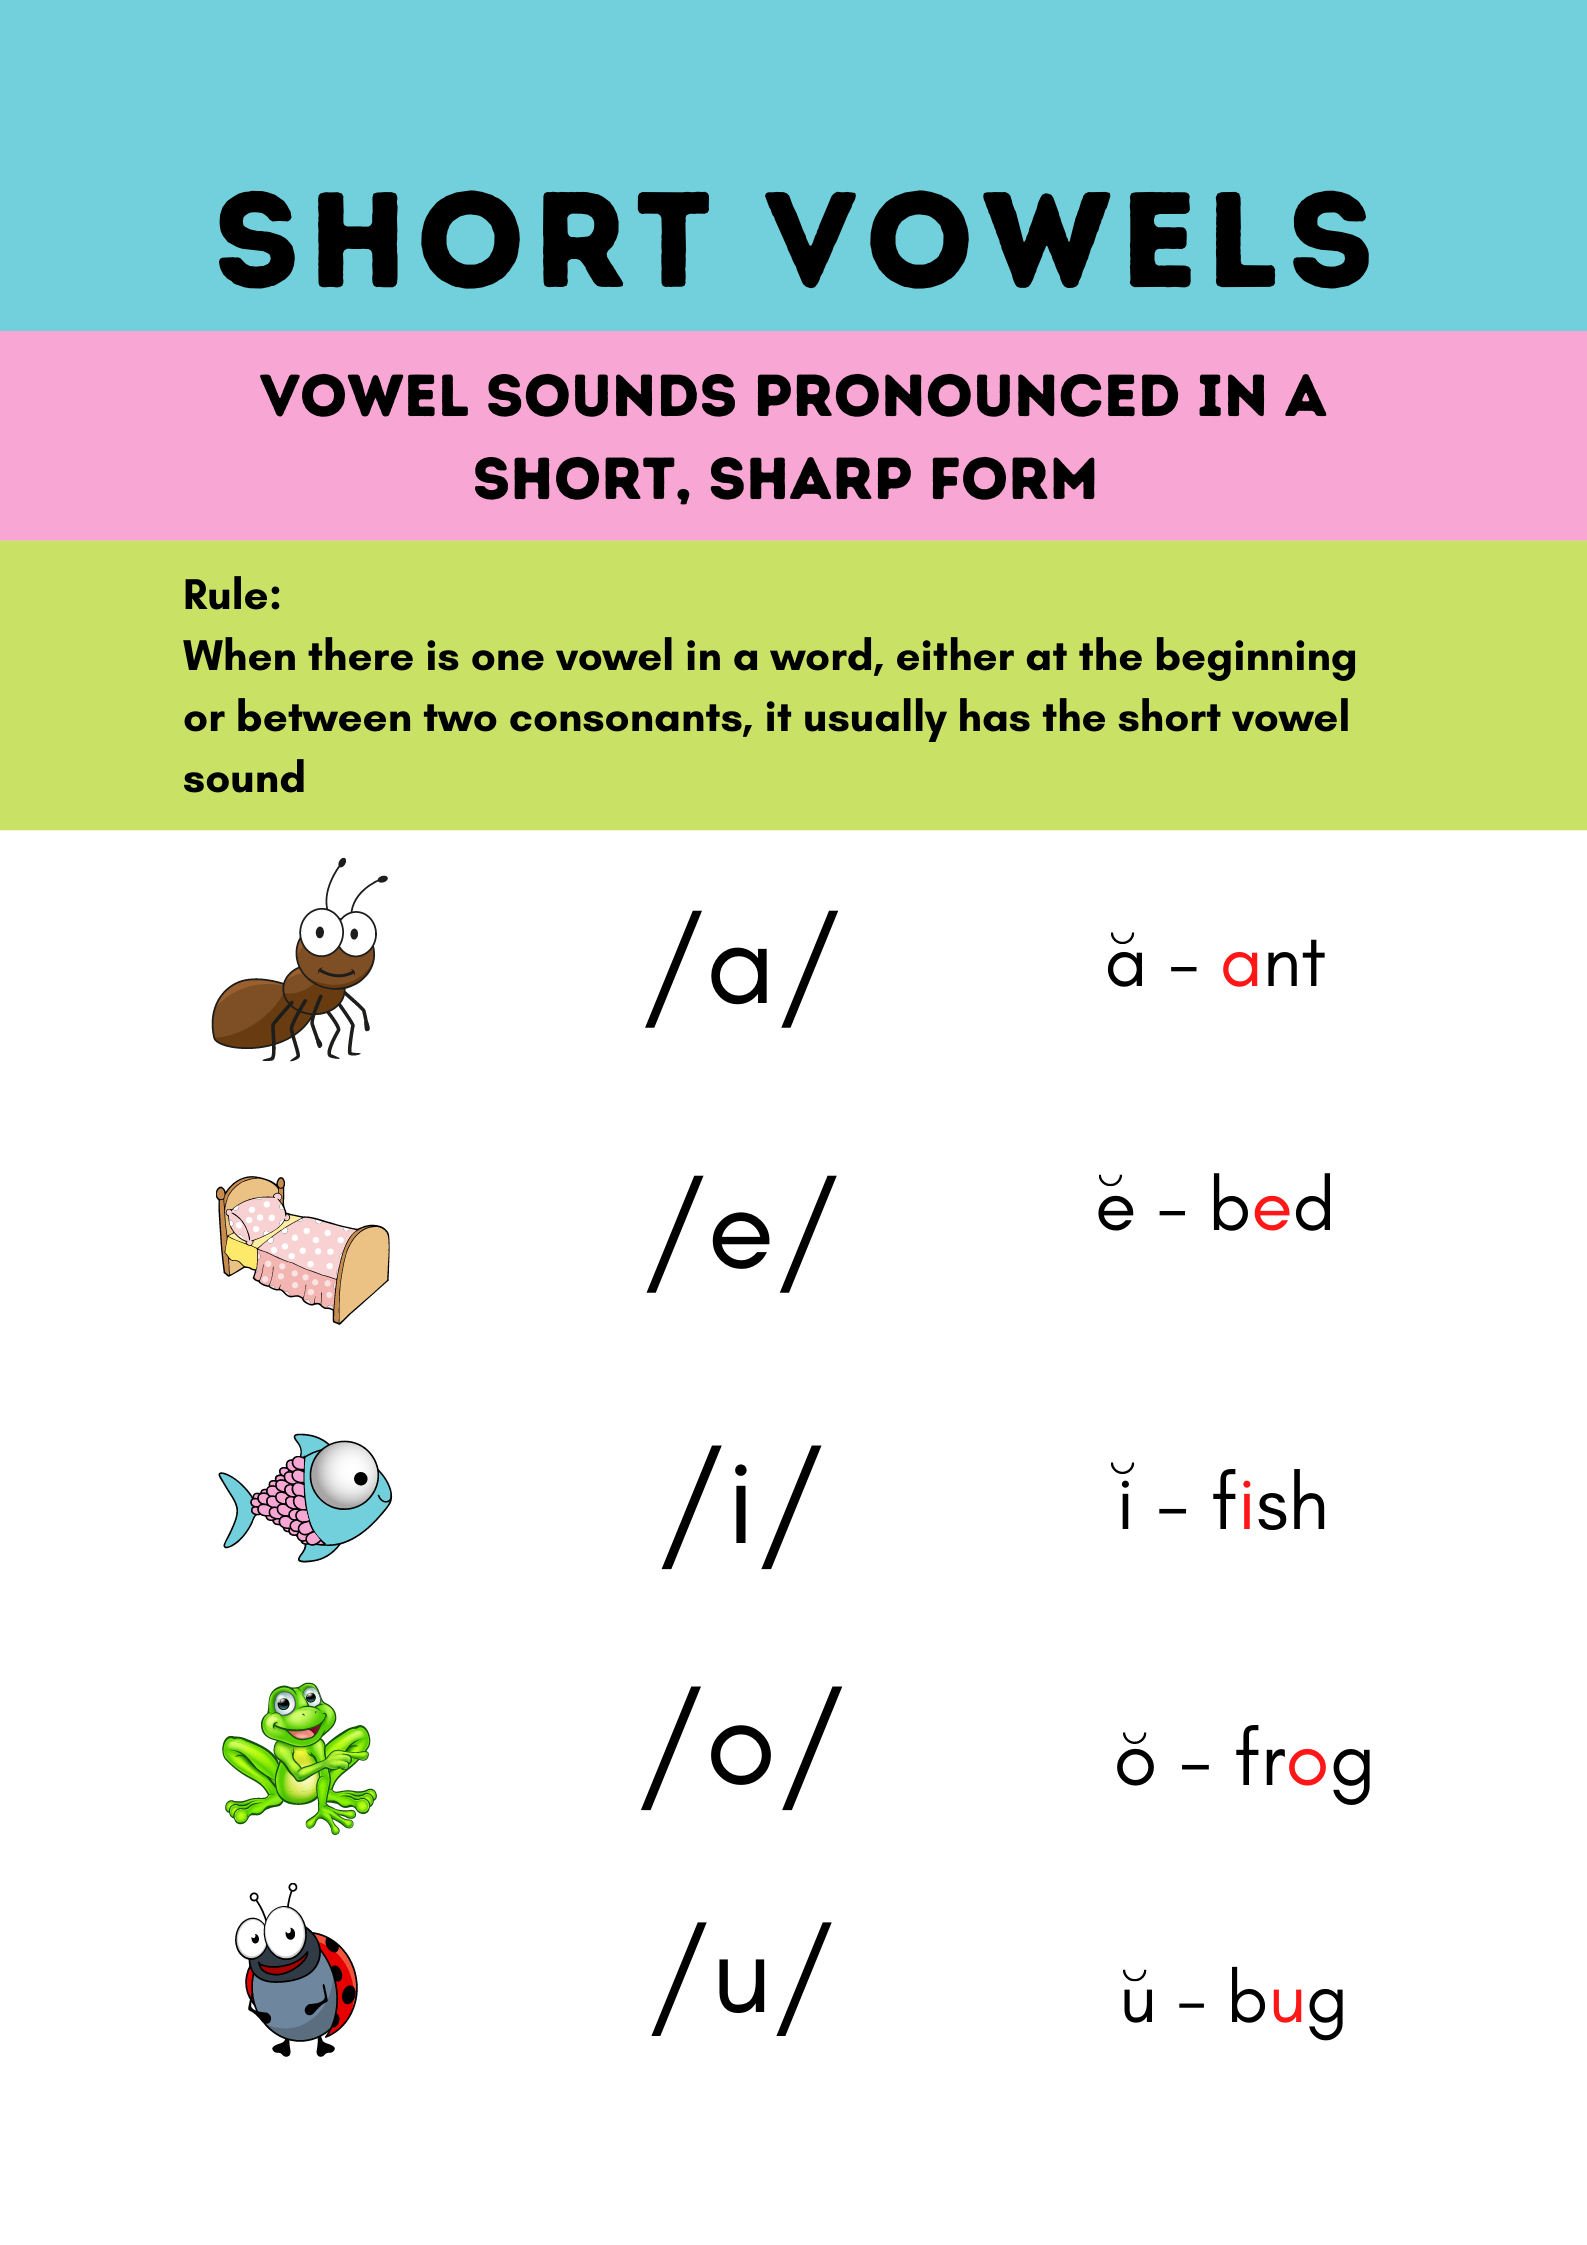 Short vowels of English